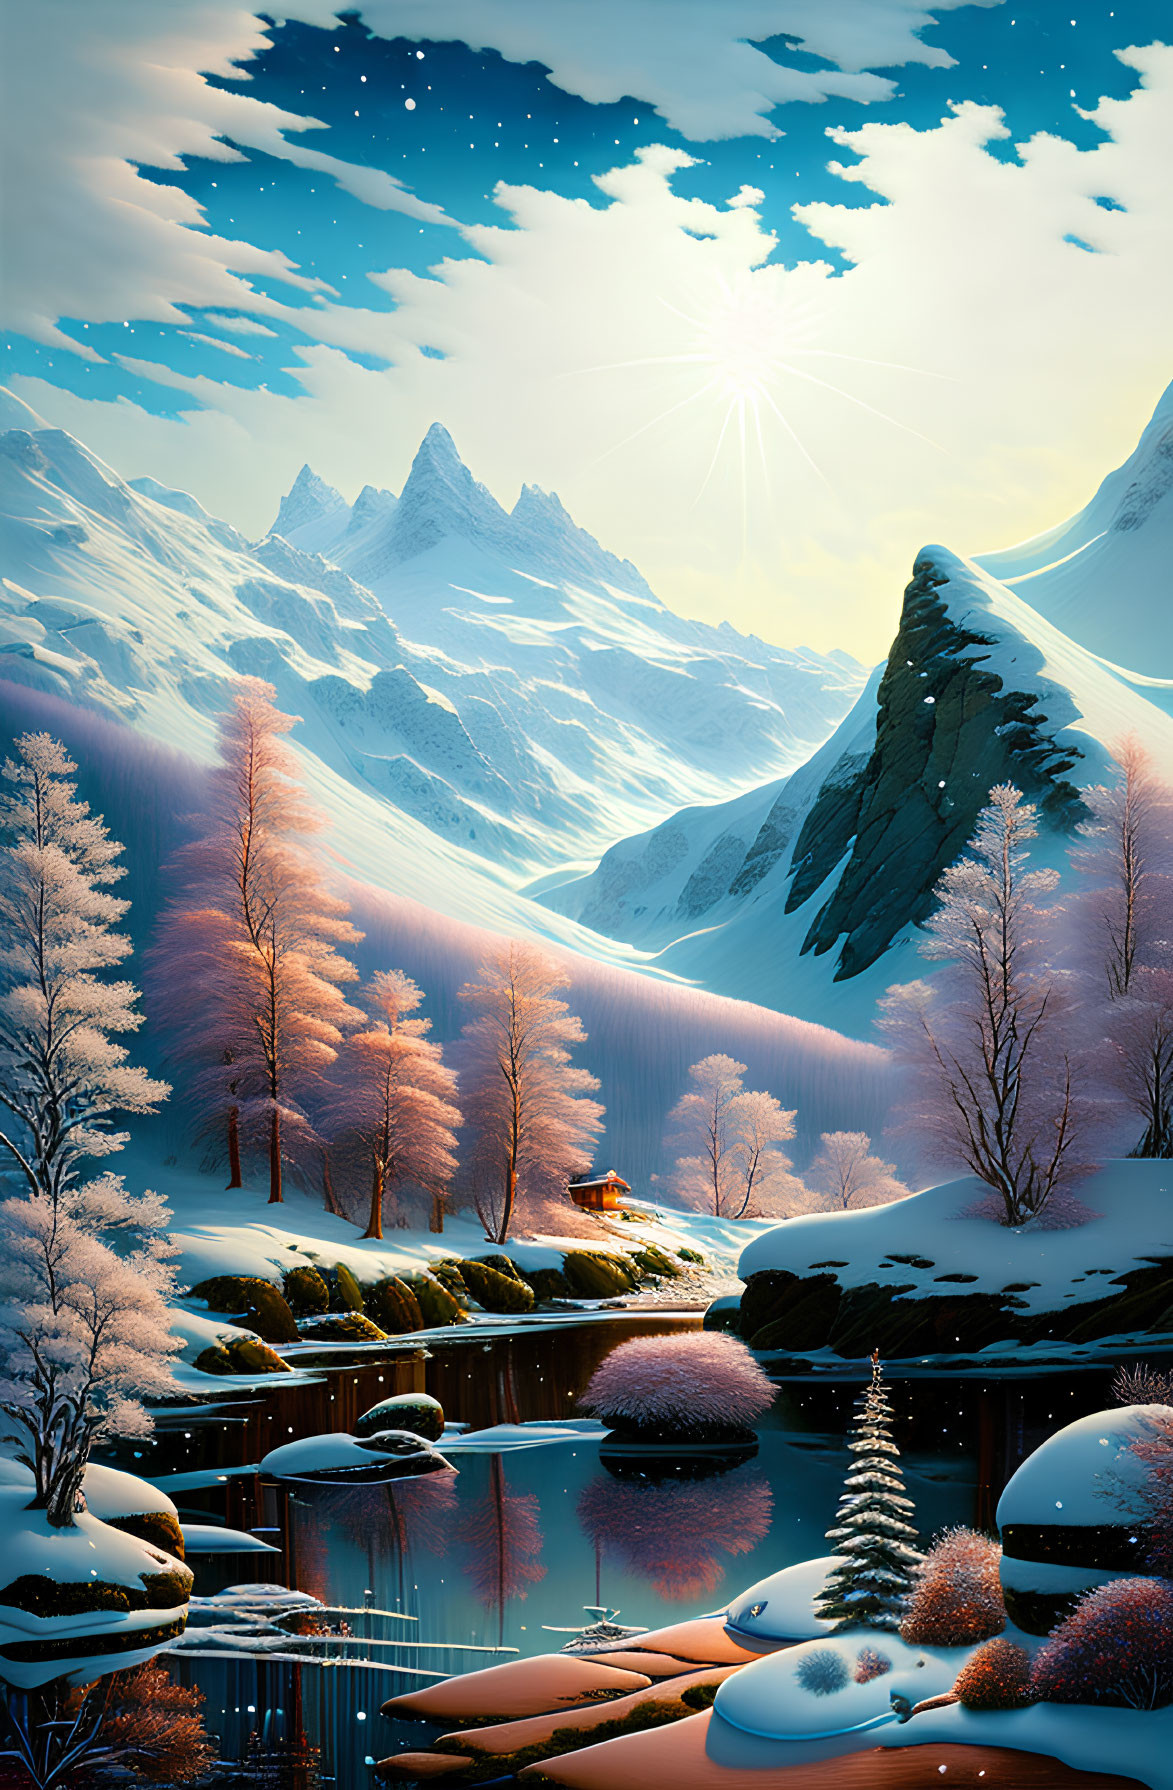 Snow-covered trees, cabin, lake, mountains, and sun in serene winter landscape